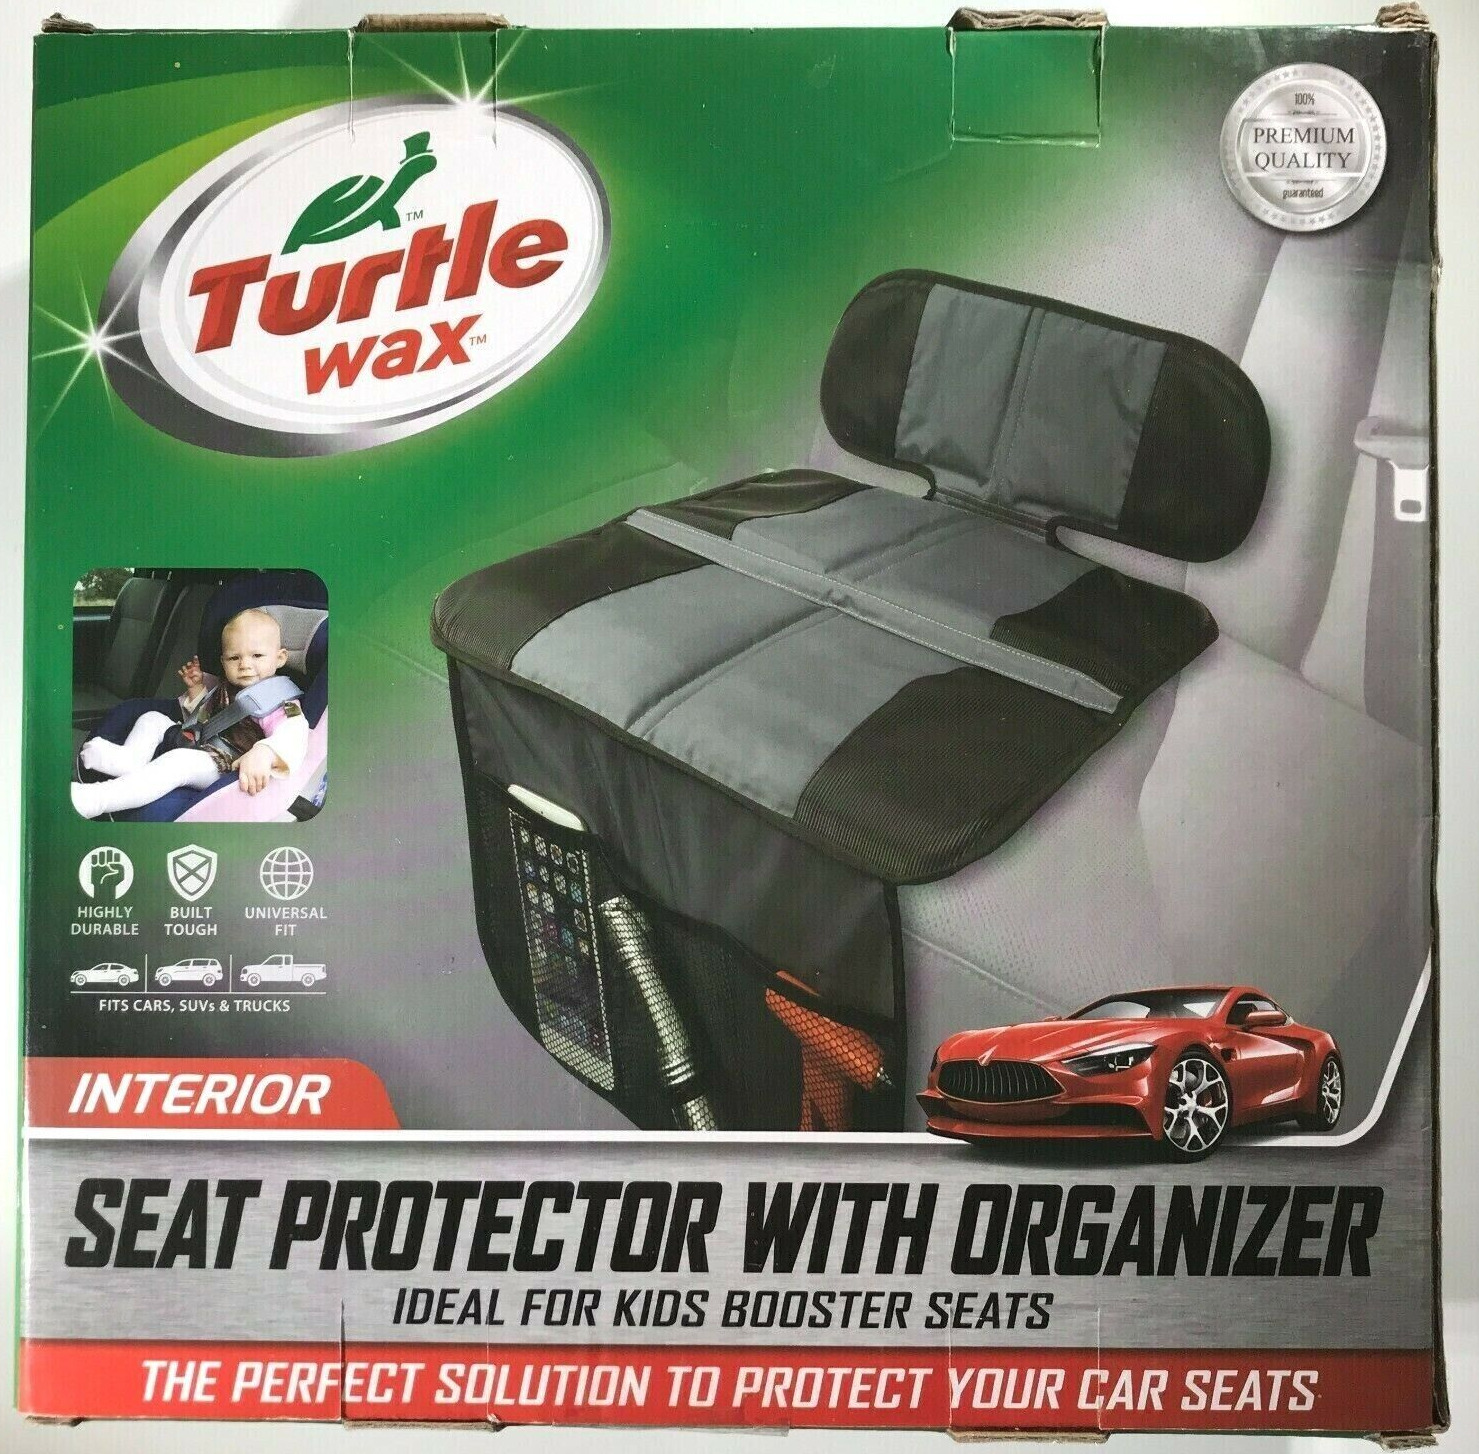 Turtle Wax seat protector with organizer, perfect for booster seats. Box worn